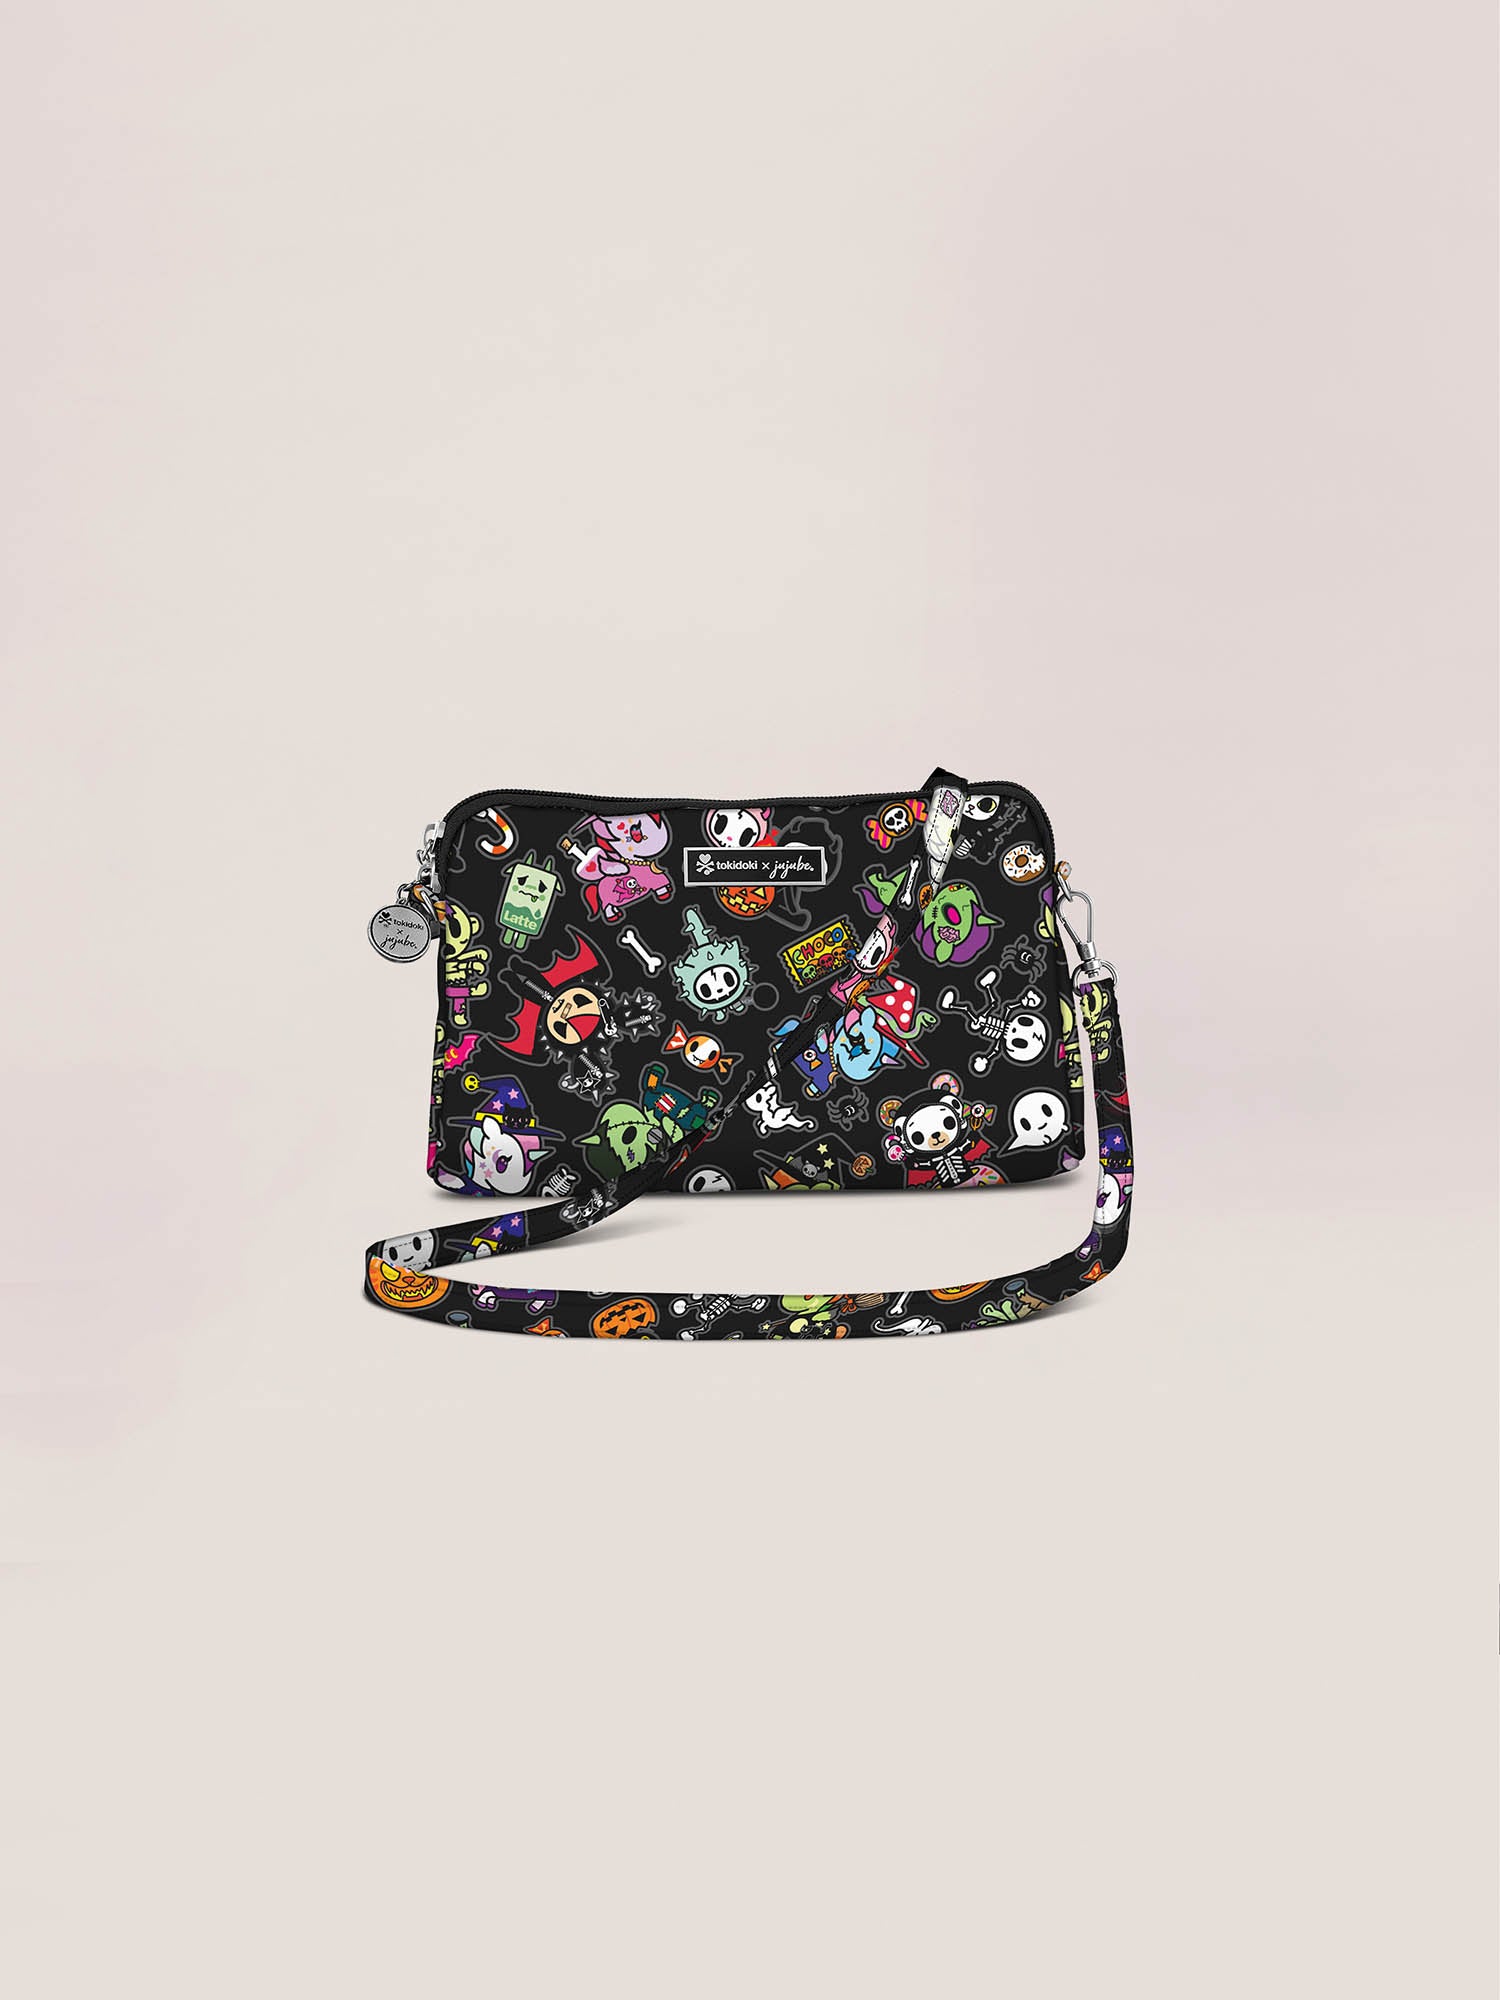 Tokidoki Spooktacular Print: Vibrant Halloween-themed design featuring whimsical characters on a black background